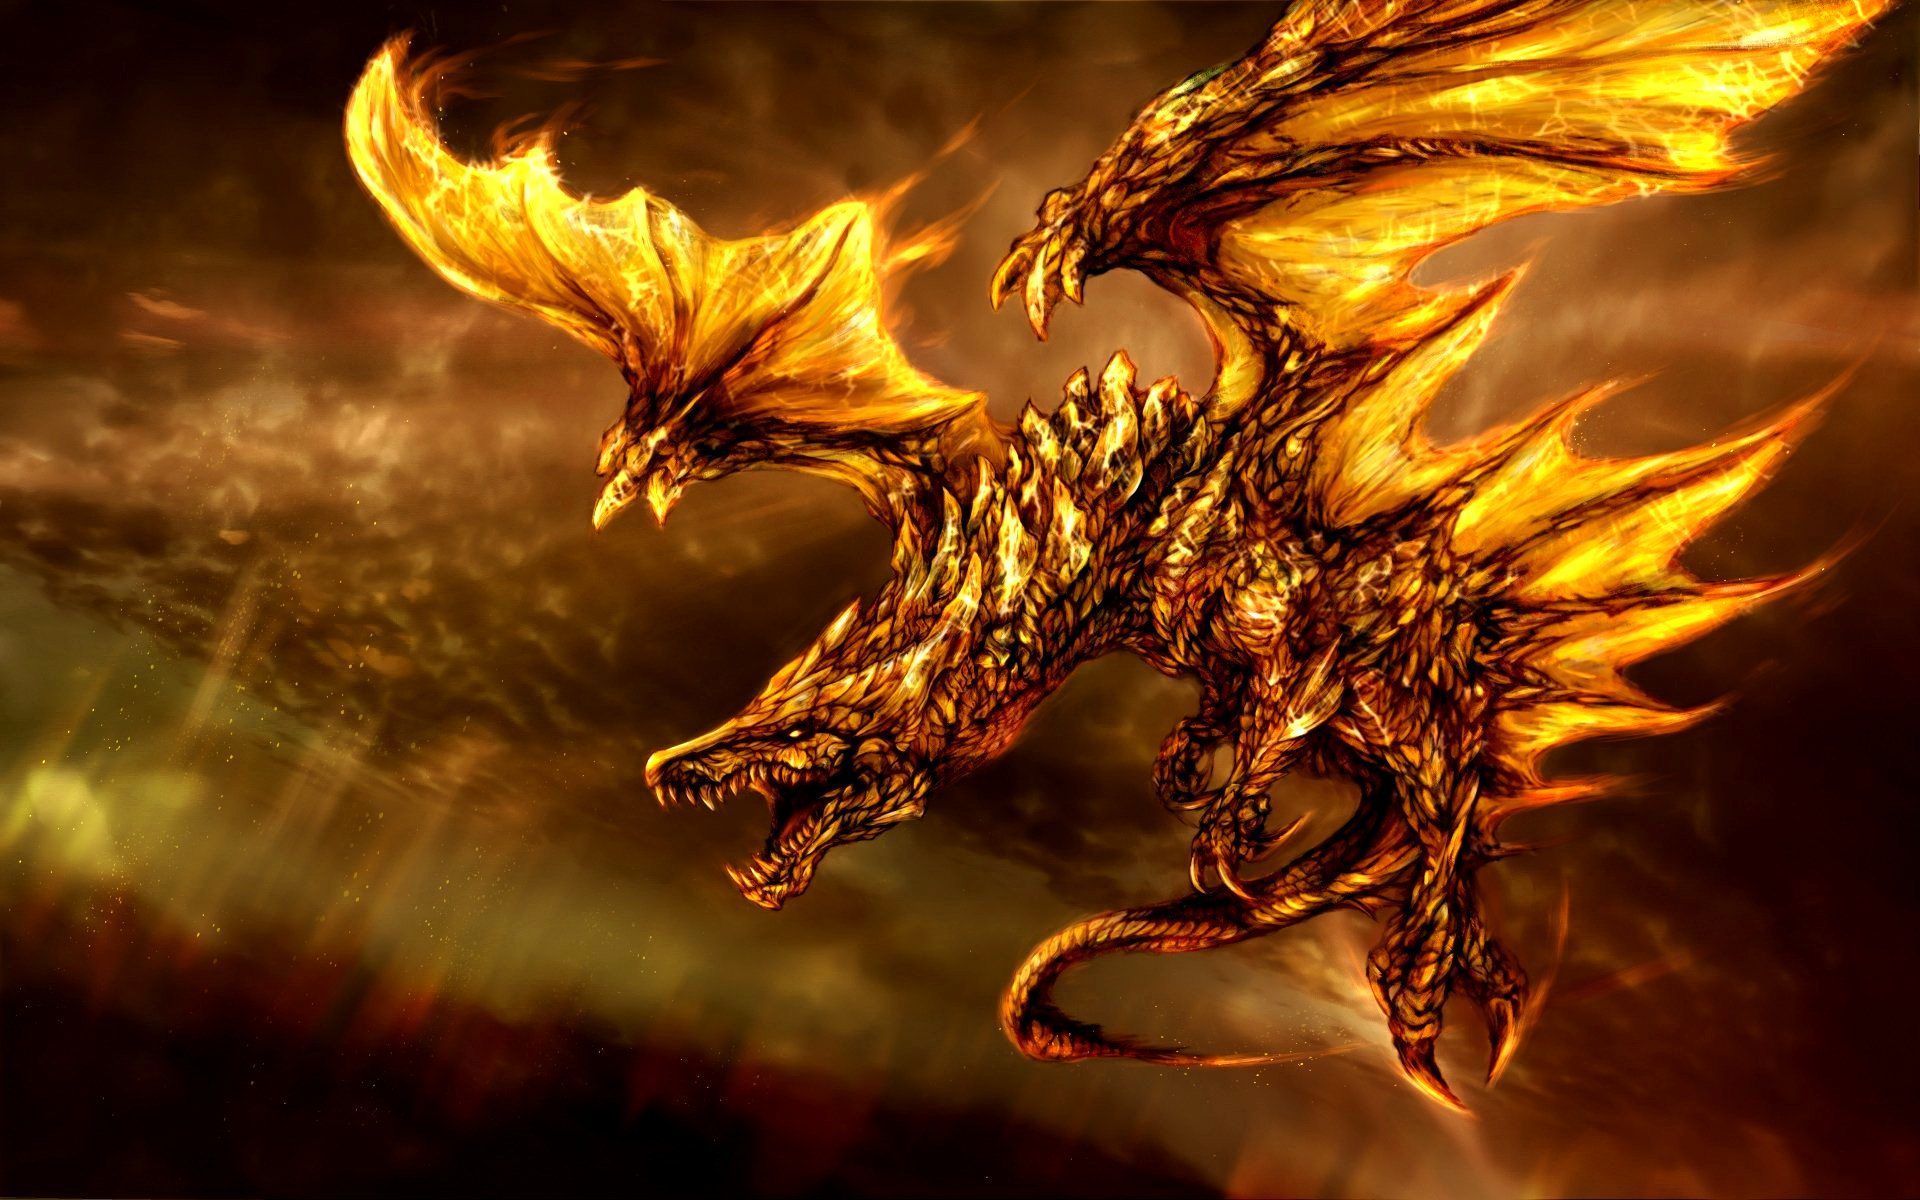 Free Download Fire Dragon Wallpapers At Movies Monodomo 1920x1200 For Your Desktop Mobile Tablet Explore 71 Free Dragon Wallpapers For Desktop Dragons Wallpaper Dragon Wallpapers Free Download 3d Dragon Wallpaper Free